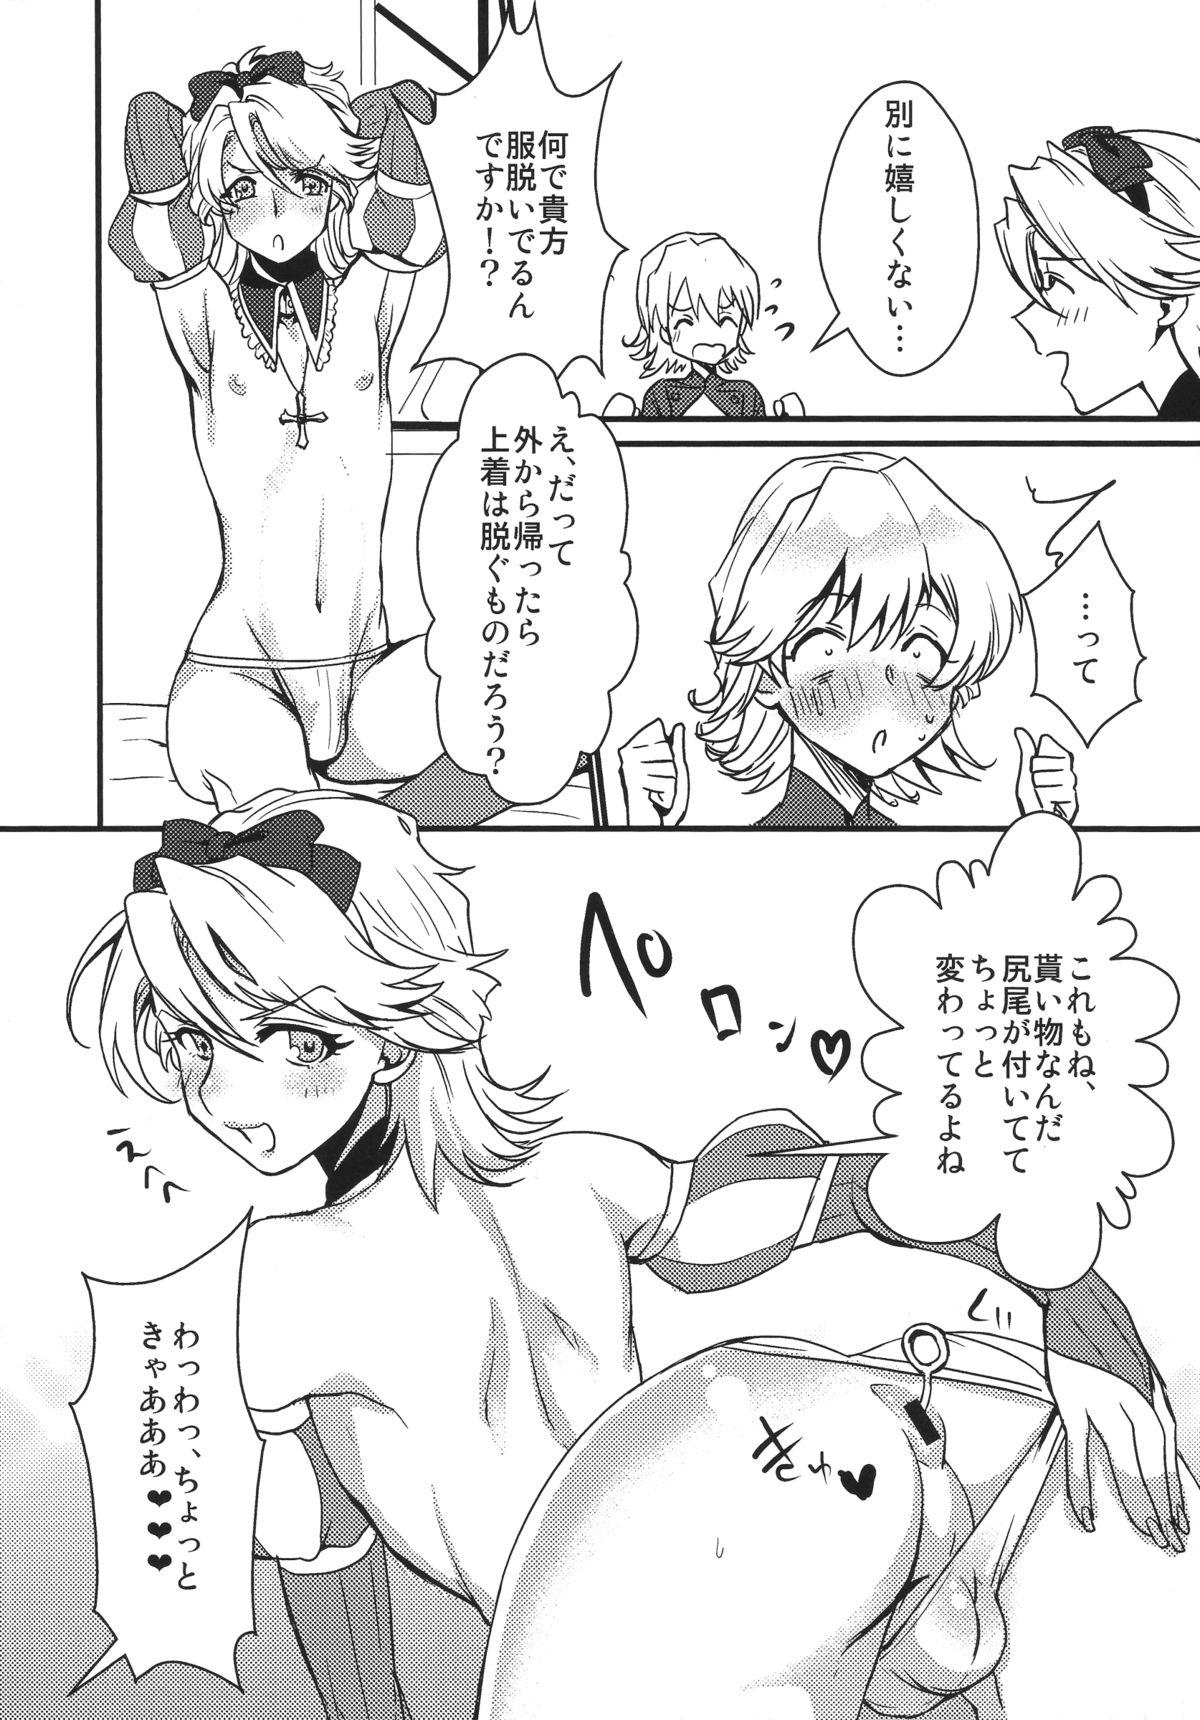 Amature Sex The eve - Tiger and bunny Teasing - Page 11